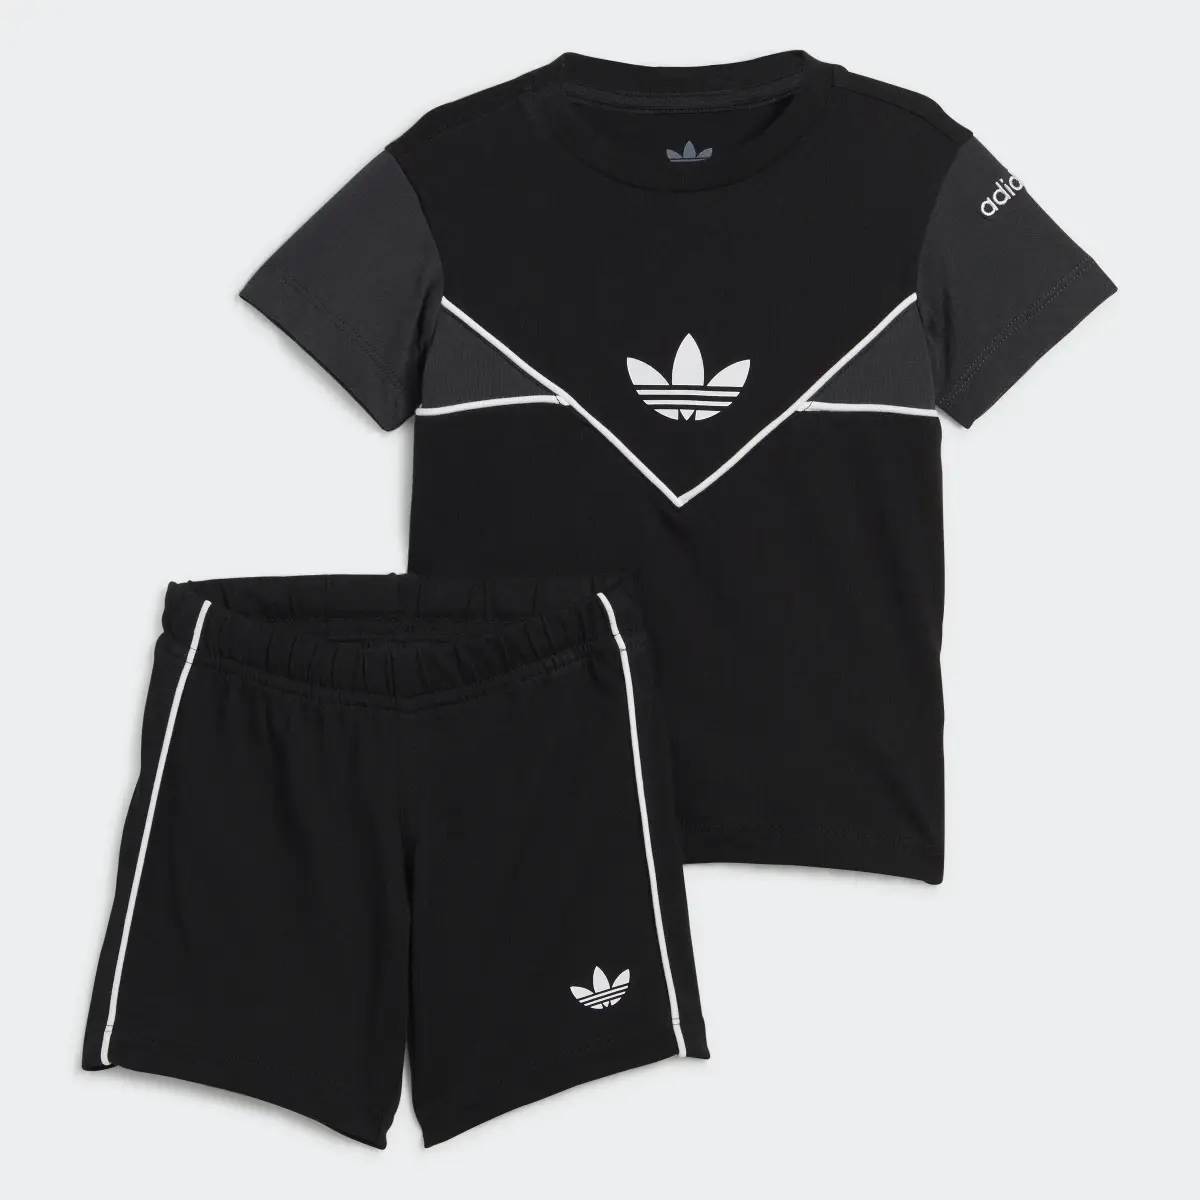 Adidas Completo adicolor Shorts and Tee. 2